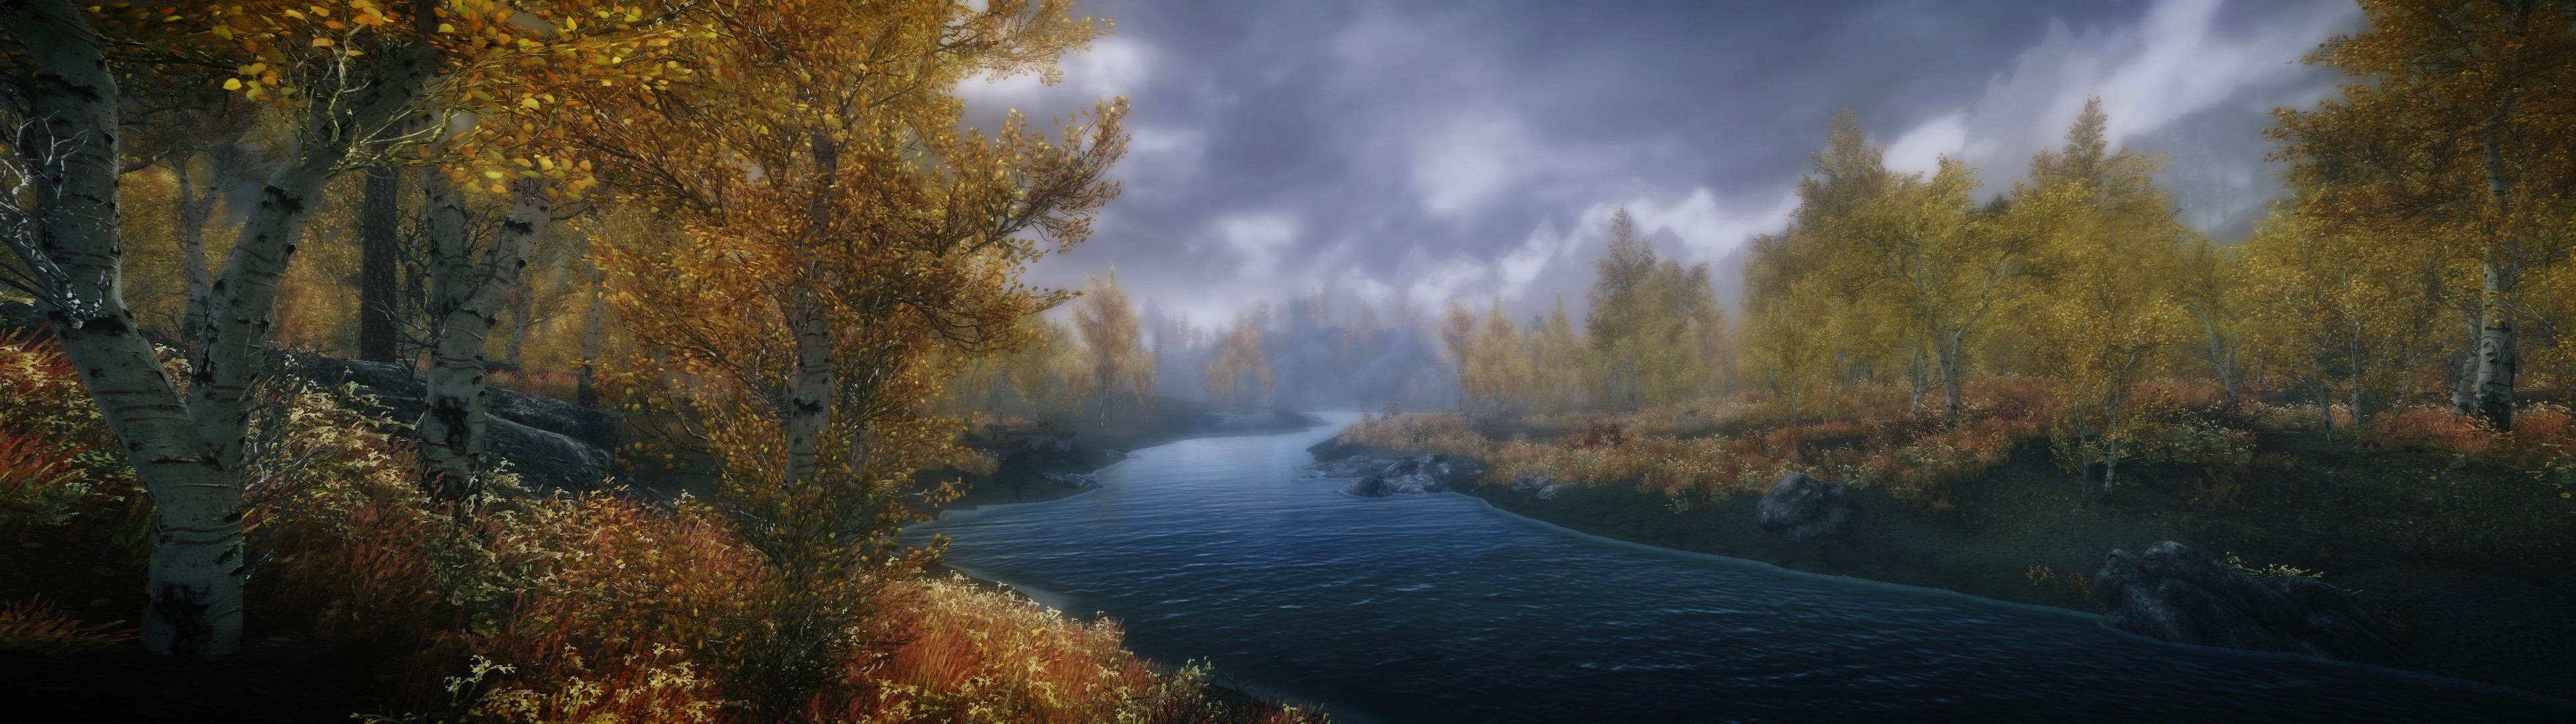 skyrim special edition 1.9.32.0 patch download